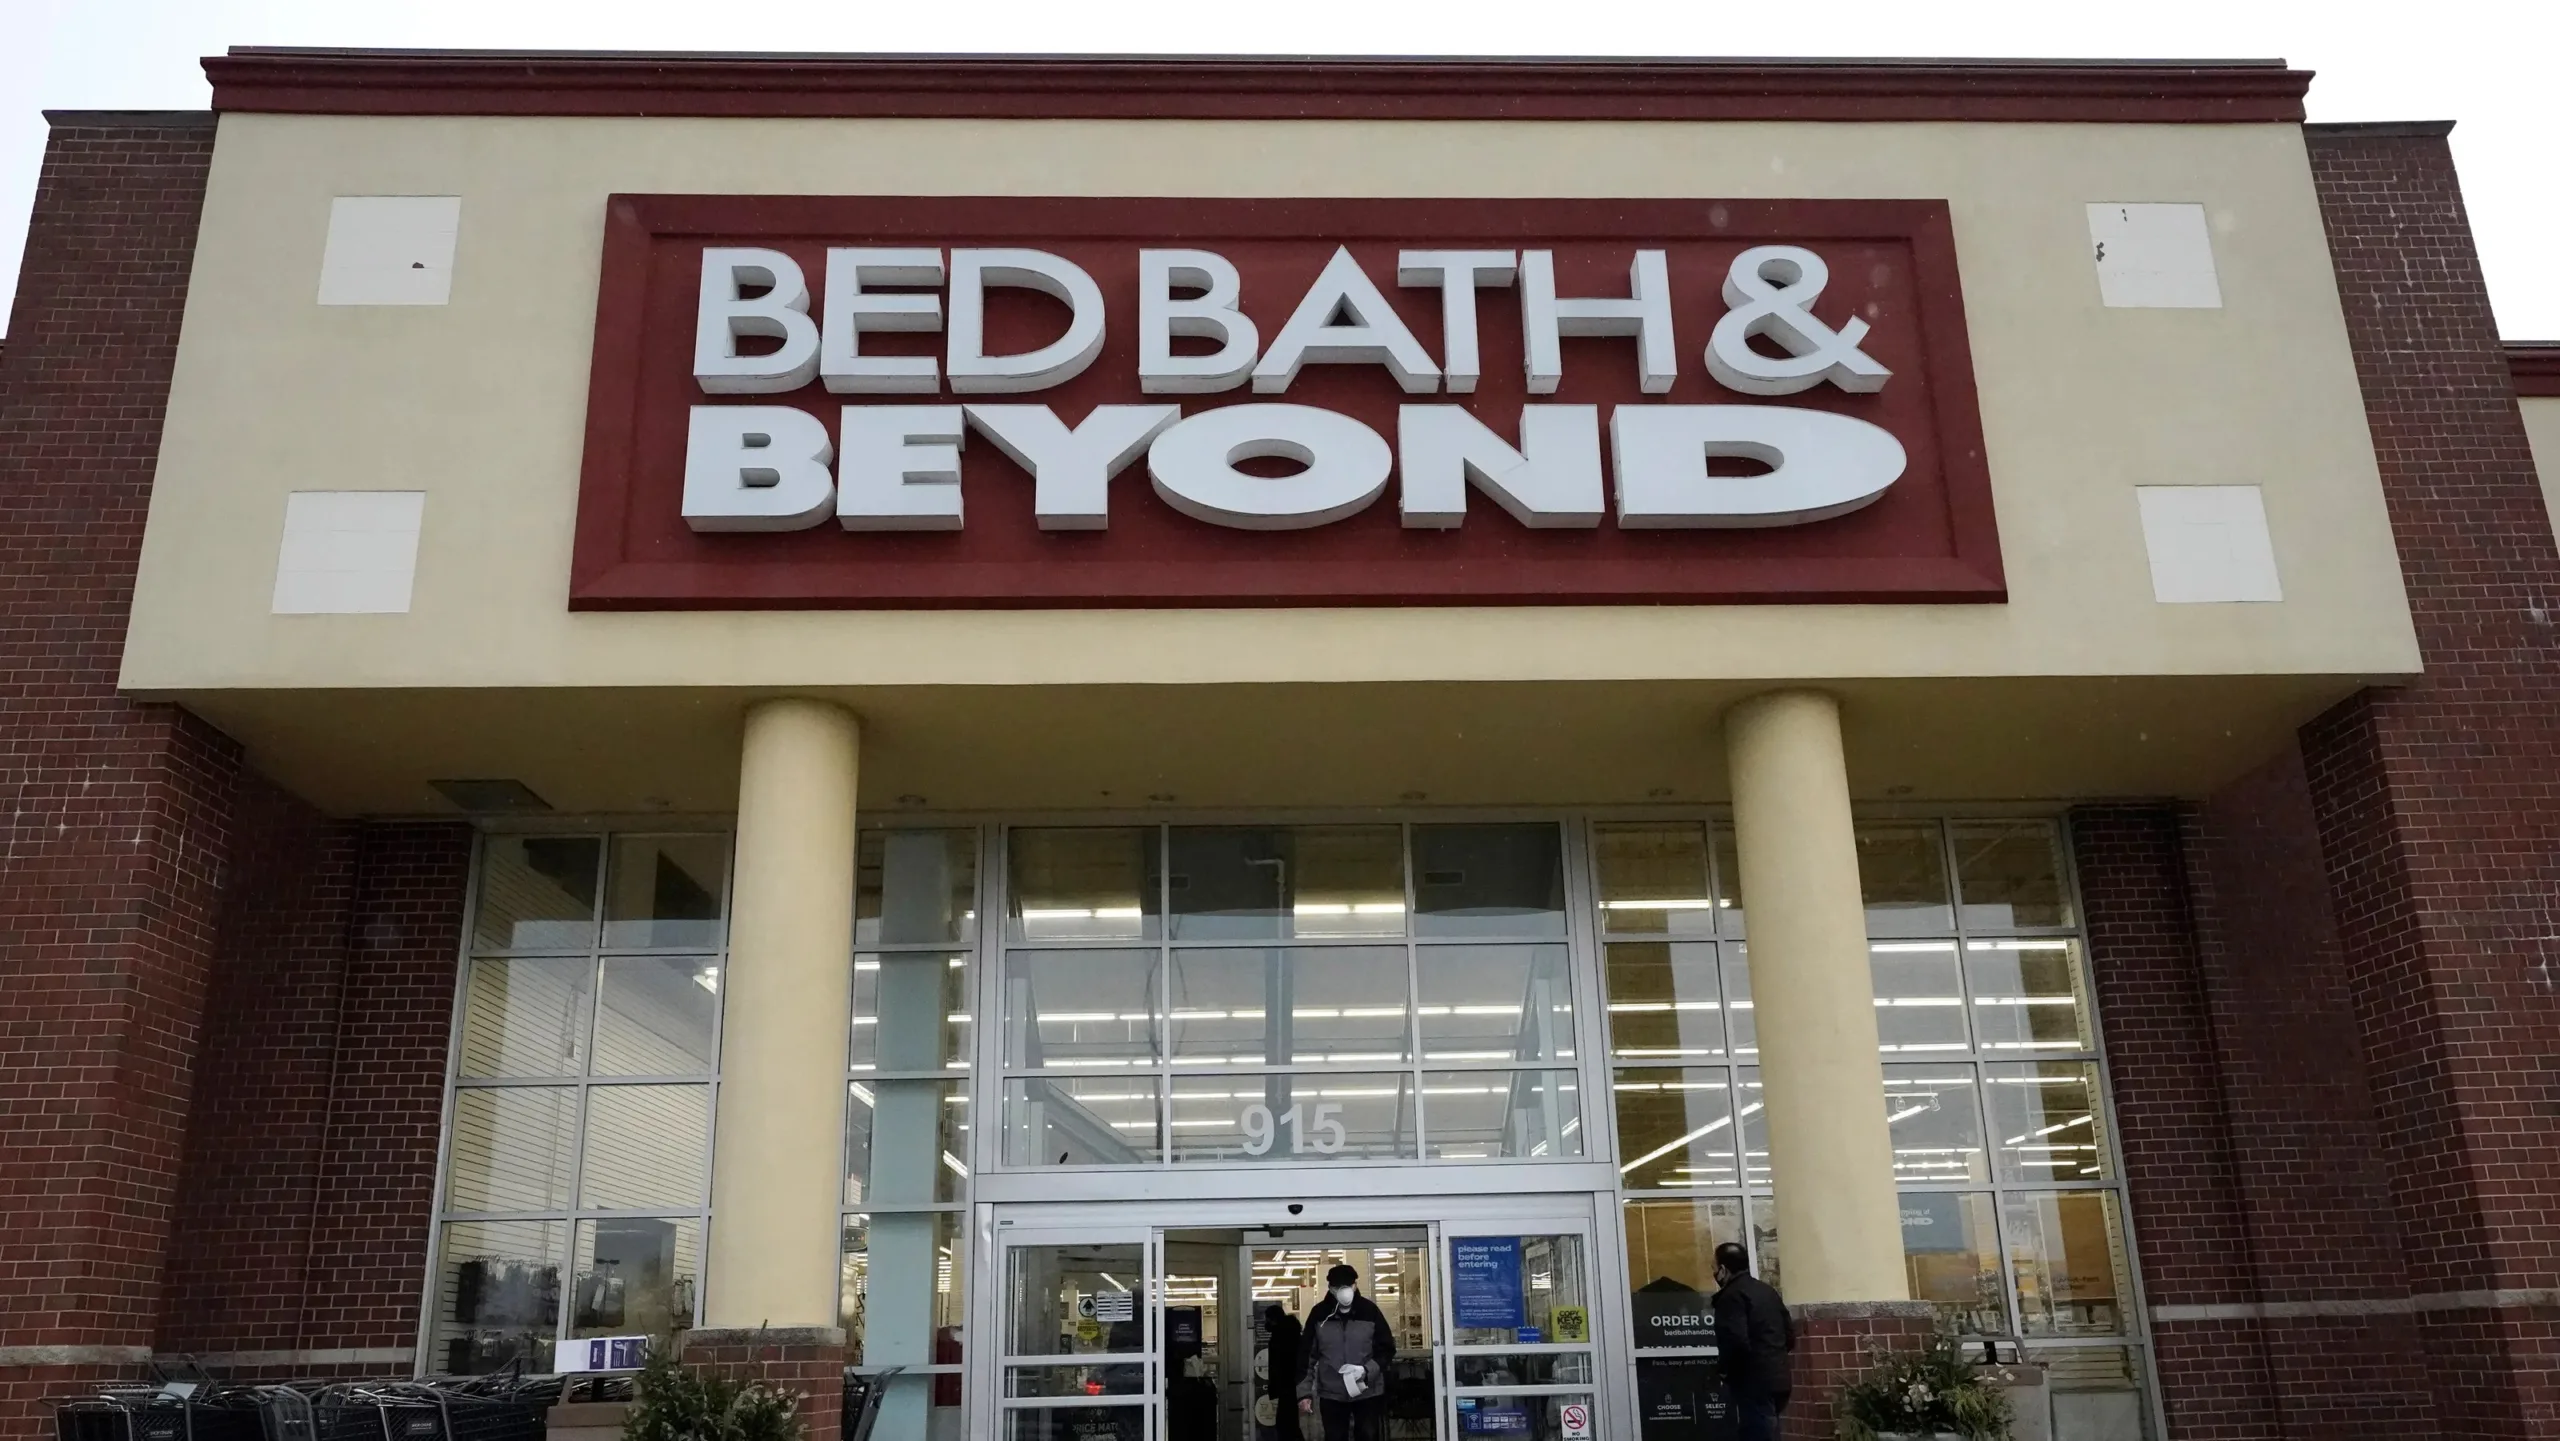 Bed Bath & Beyond takes another hit with grim announcement